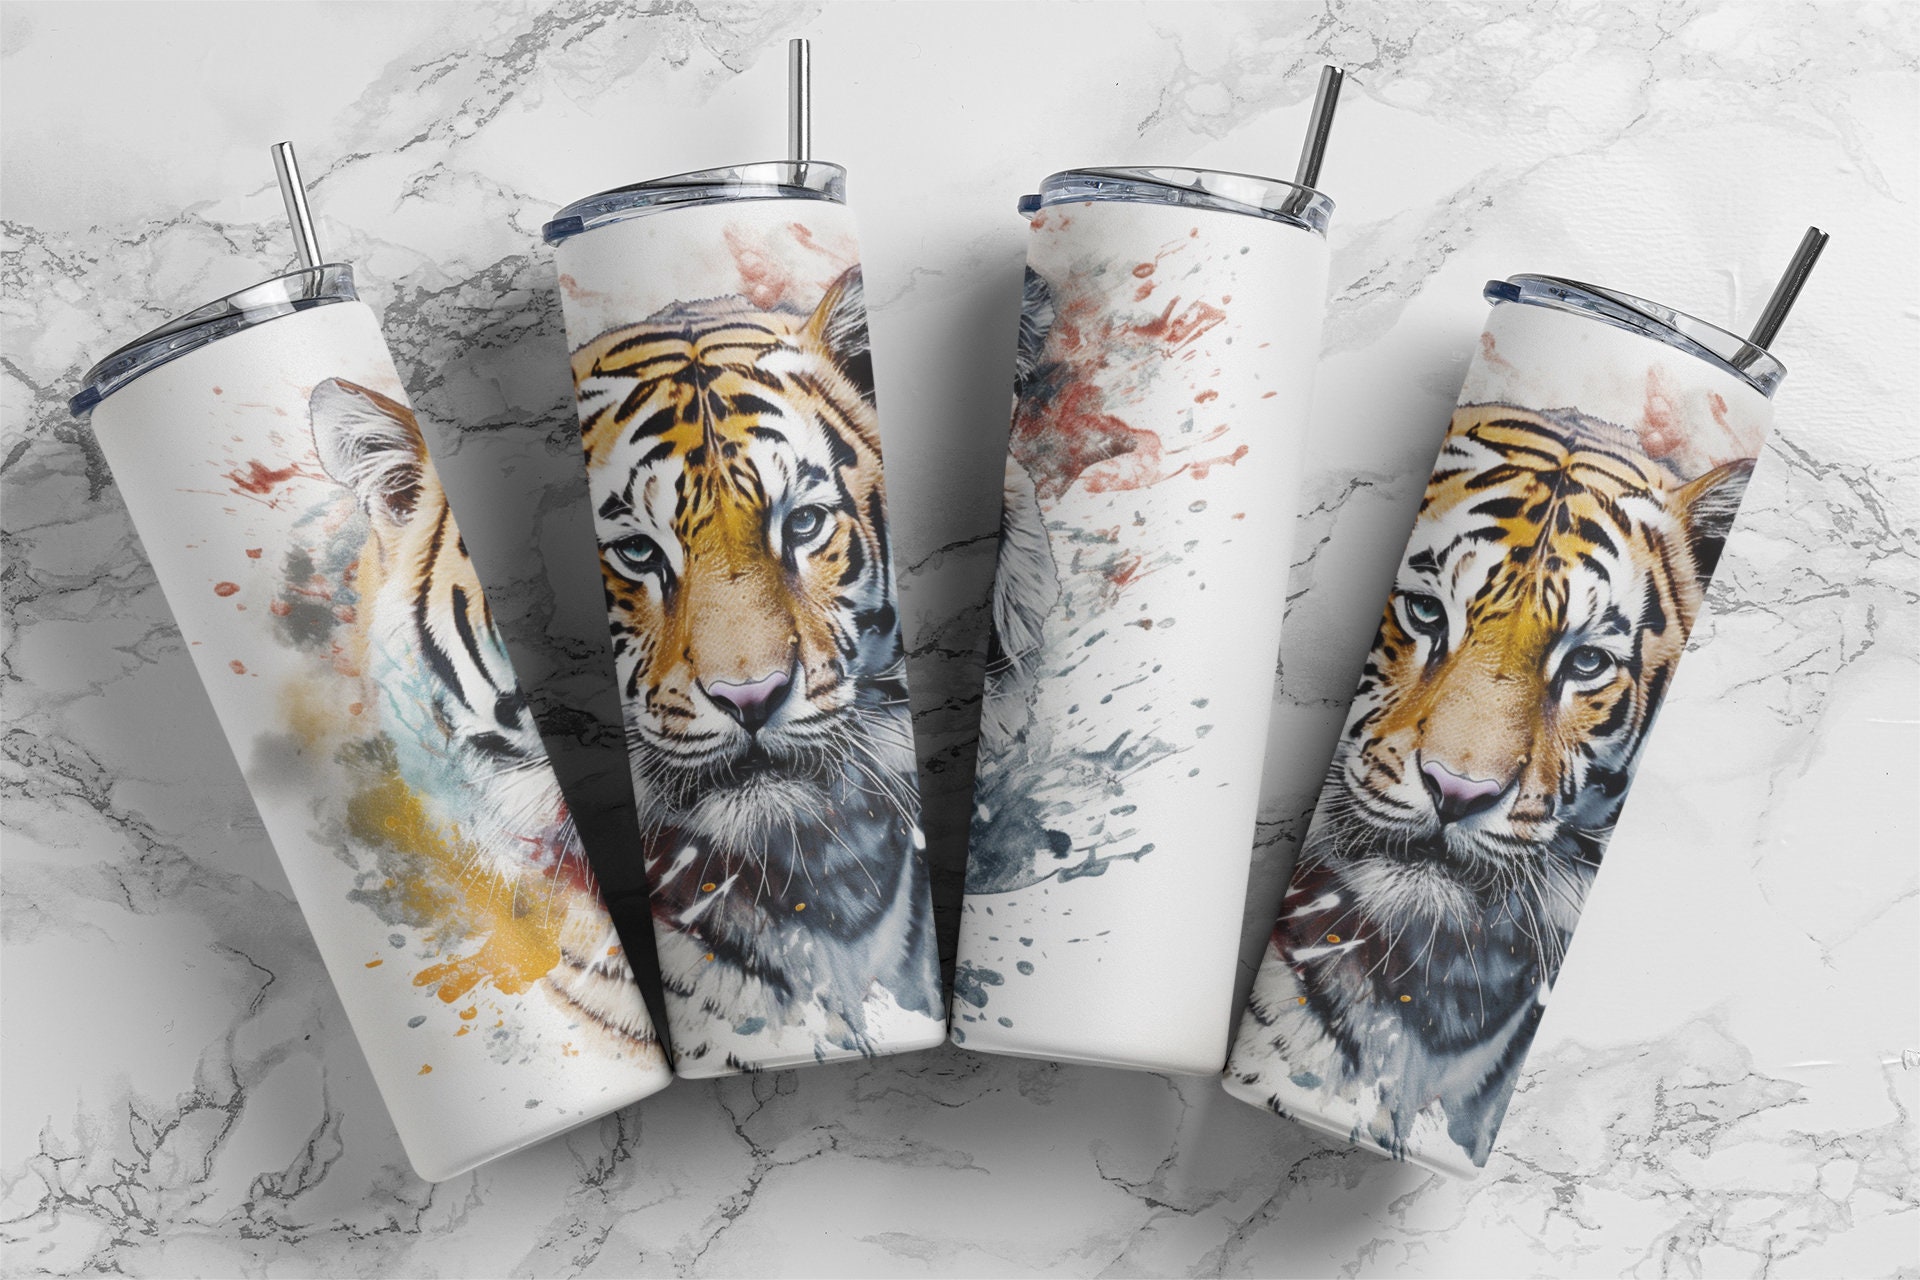 MYMISOR Tiger Coffee Tumbler 20oz Stand Up For What You Believe Inspiration  Tumblers For Men Vintage…See more MYMISOR Tiger Coffee Tumbler 20oz Stand